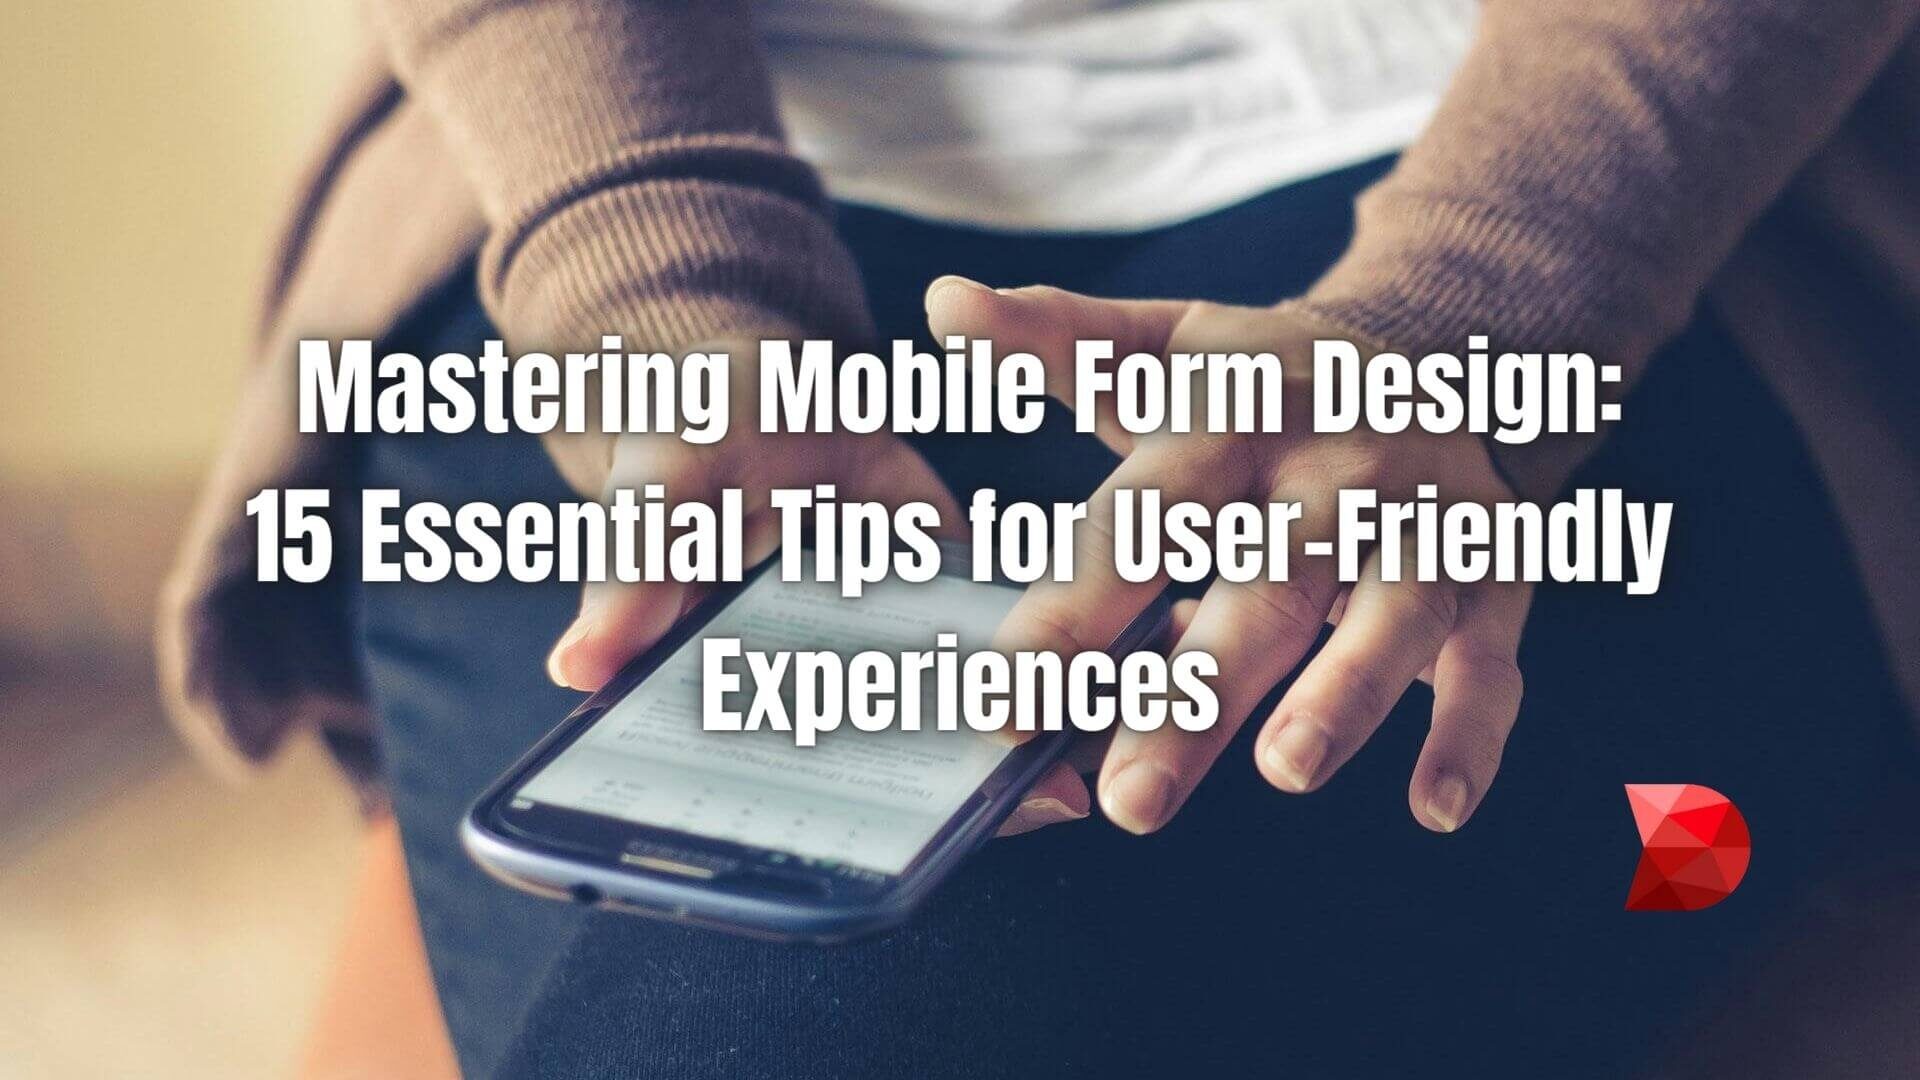 Unlock the secrets of mobile form design with our guide! Discover 15 essential tips for creating user-friendly experiences on any device.